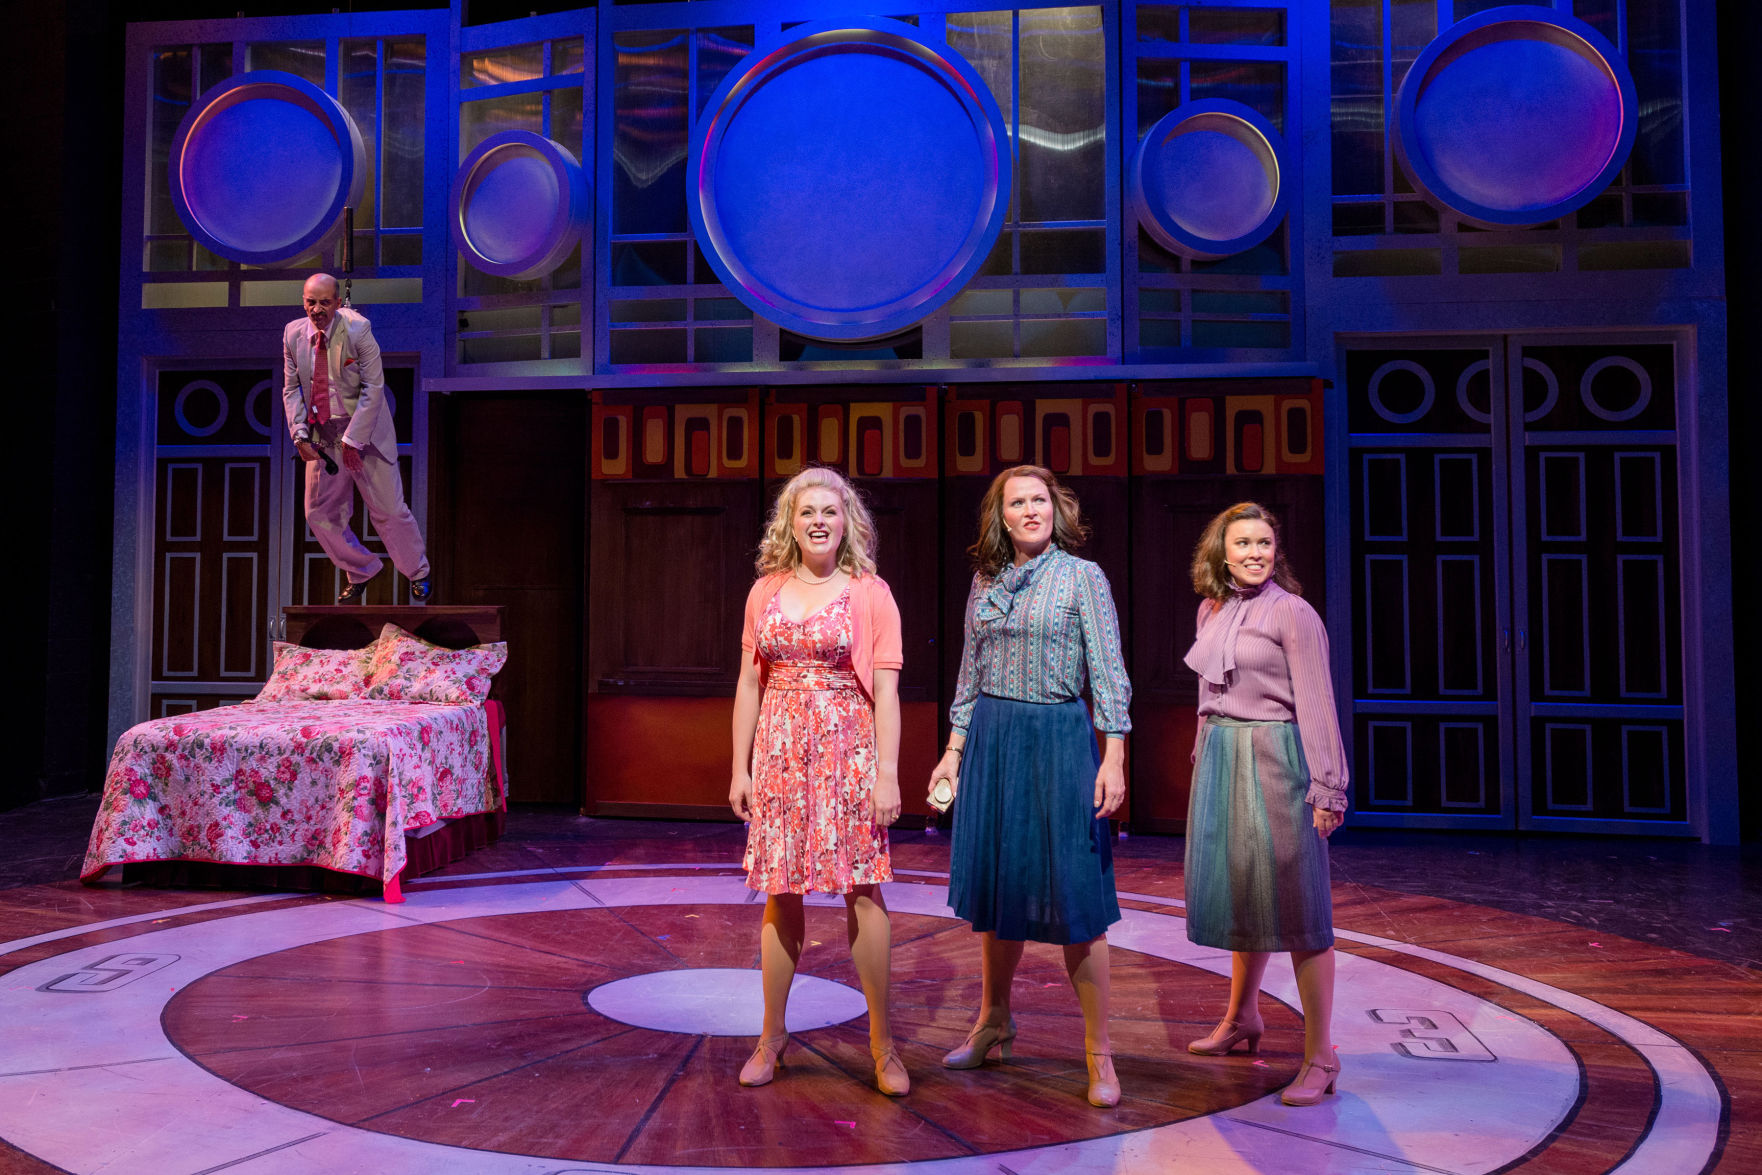 From left, Fabio Polanco as Franklin Hart, Jr., Erin Diroll as Doralee, Amy Fritsche as Violet, and Courtney Elizabeth Brown as Judy. Photo | Paul Silla